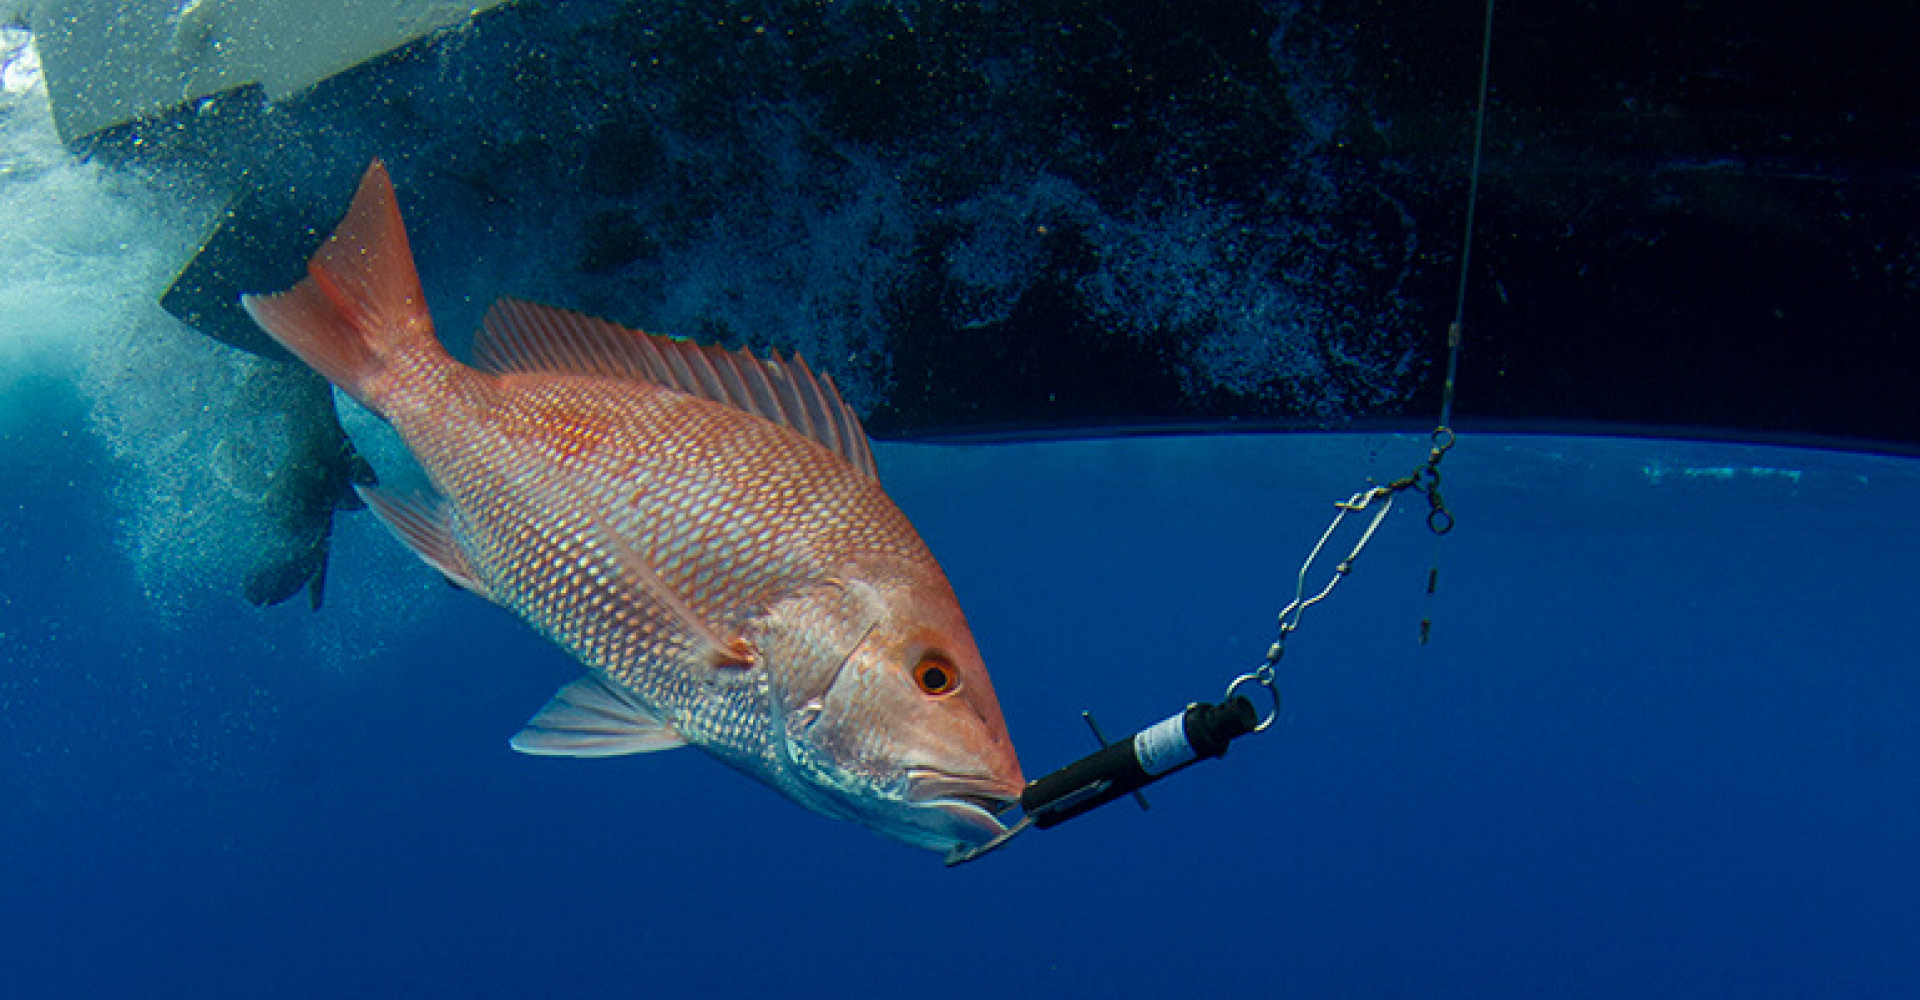 Gulf Reef Fish Anglers: Sign up for Program, Free Descender Kit